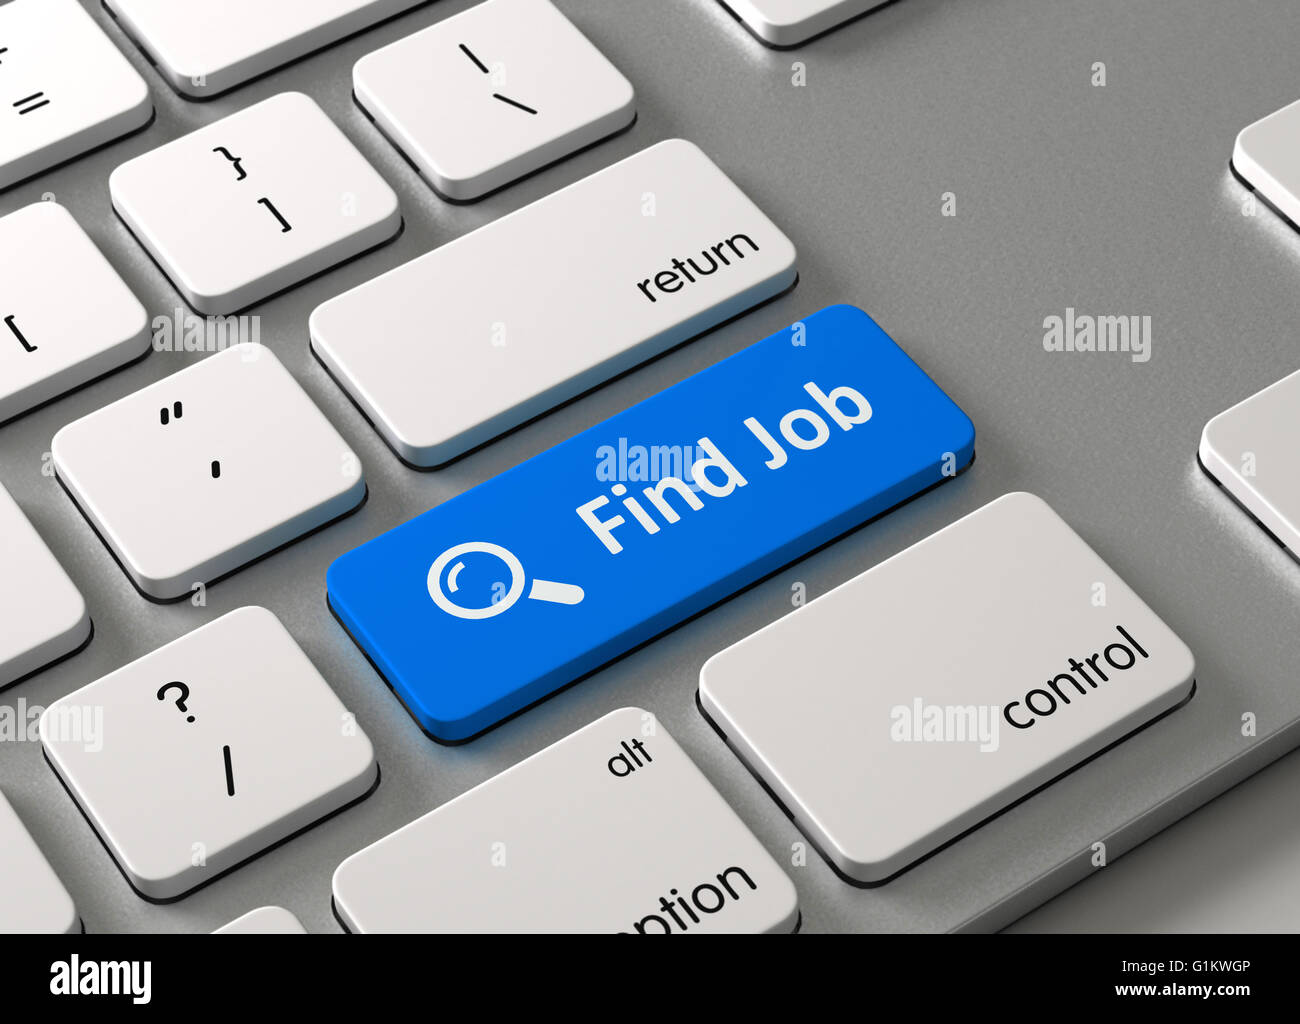 A keyboard with a blue button Find Job Stock Photo